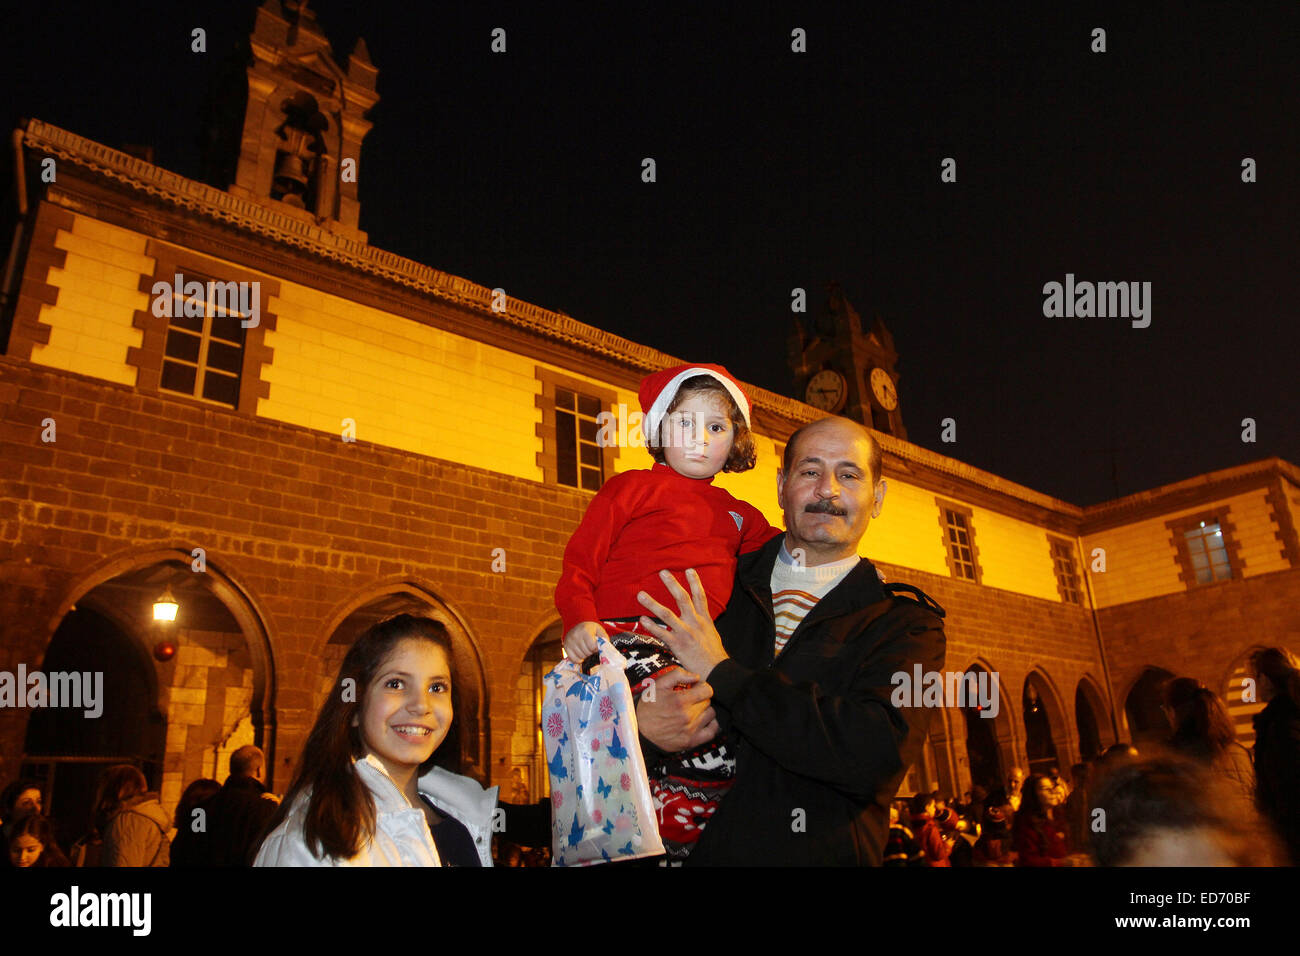 Damascus, Syria. 30th Dec, 2014. People attend the Christmas celebration at al-Zaitoun Cathedral in Damascus, capital of Syria, on Dec. 30, 2014. About 1,500 Syrian Christian kids and their parents gathered at al-Zaitoun Cathedral in Syria's capital Damascus to take part in a Christmas celebration. About 10 percent of population in Syria are Christian, who suffered persecution in some parts of the country by the hands of the extremist groups. © Bassem Tellawi/Xinhua/Alamy Live News Stock Photo